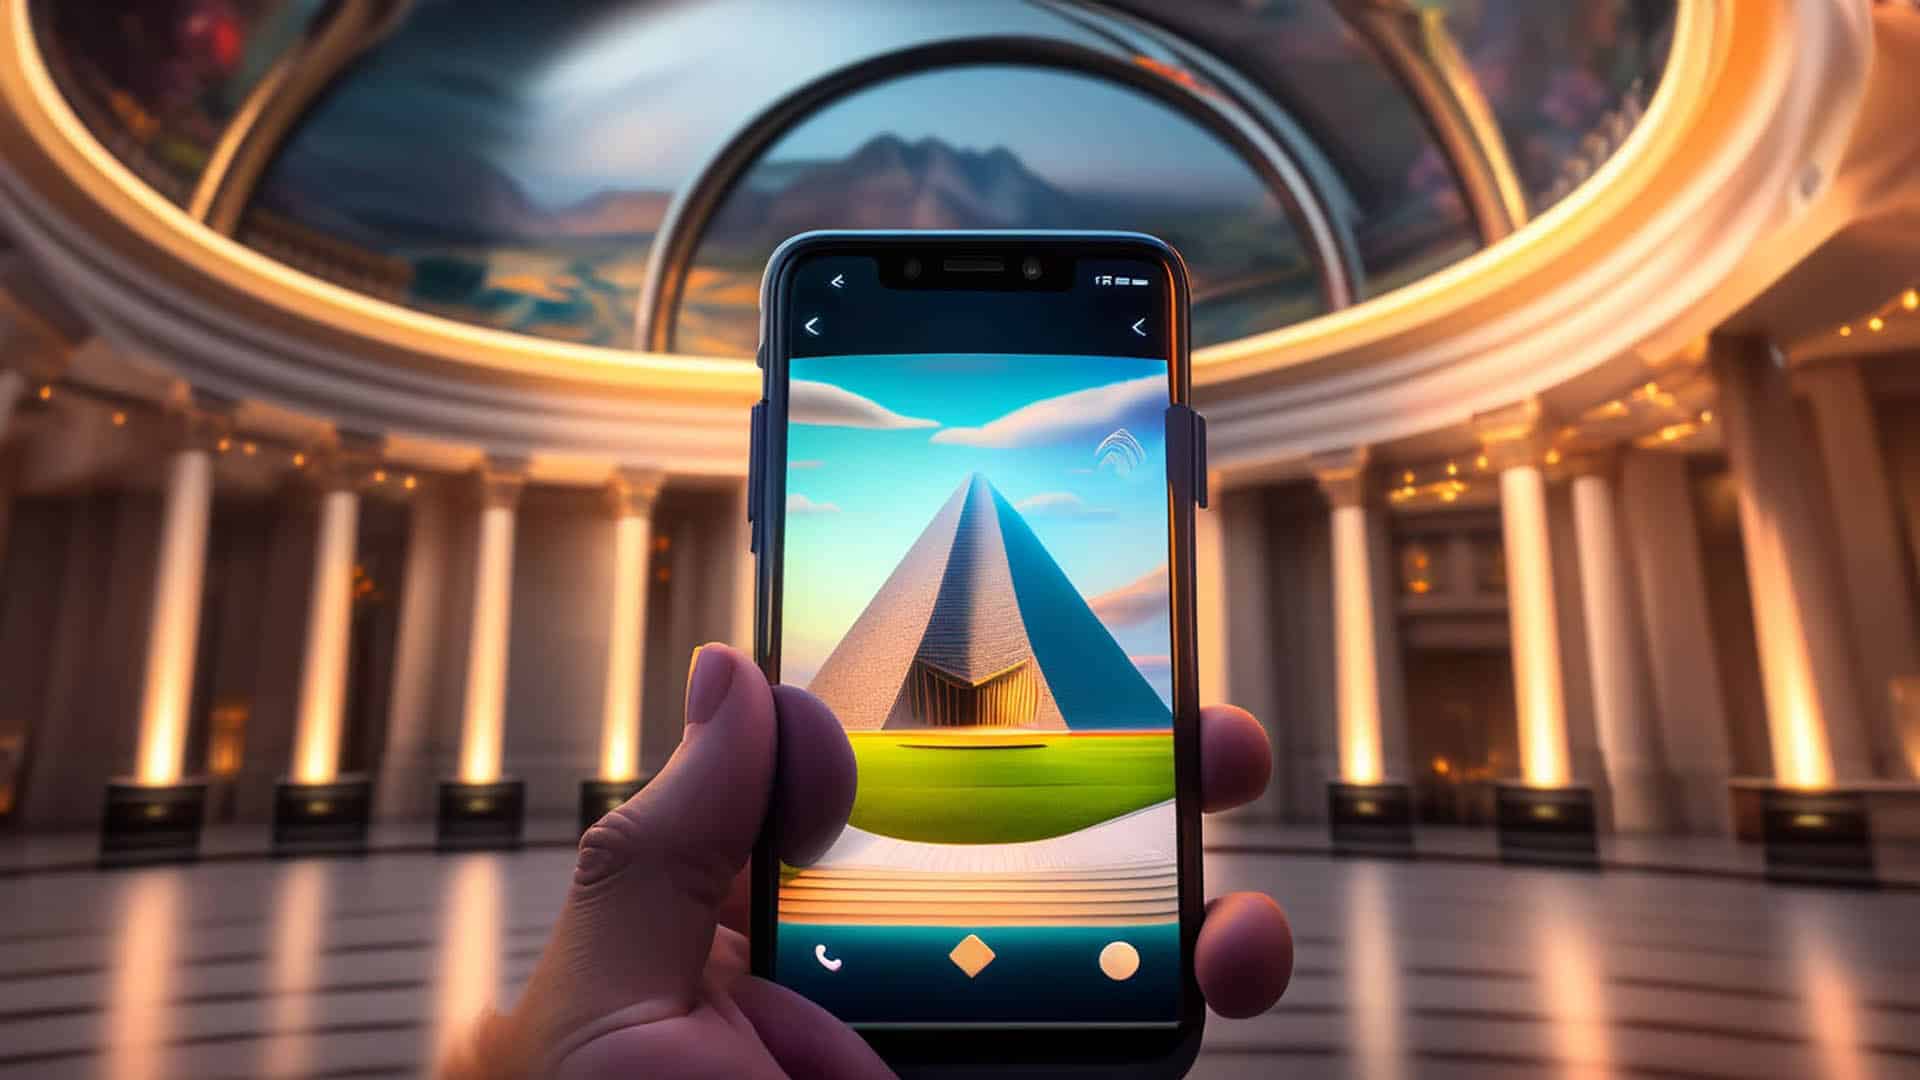 Benefits of Integrating AR Experiences in Tourist Sites